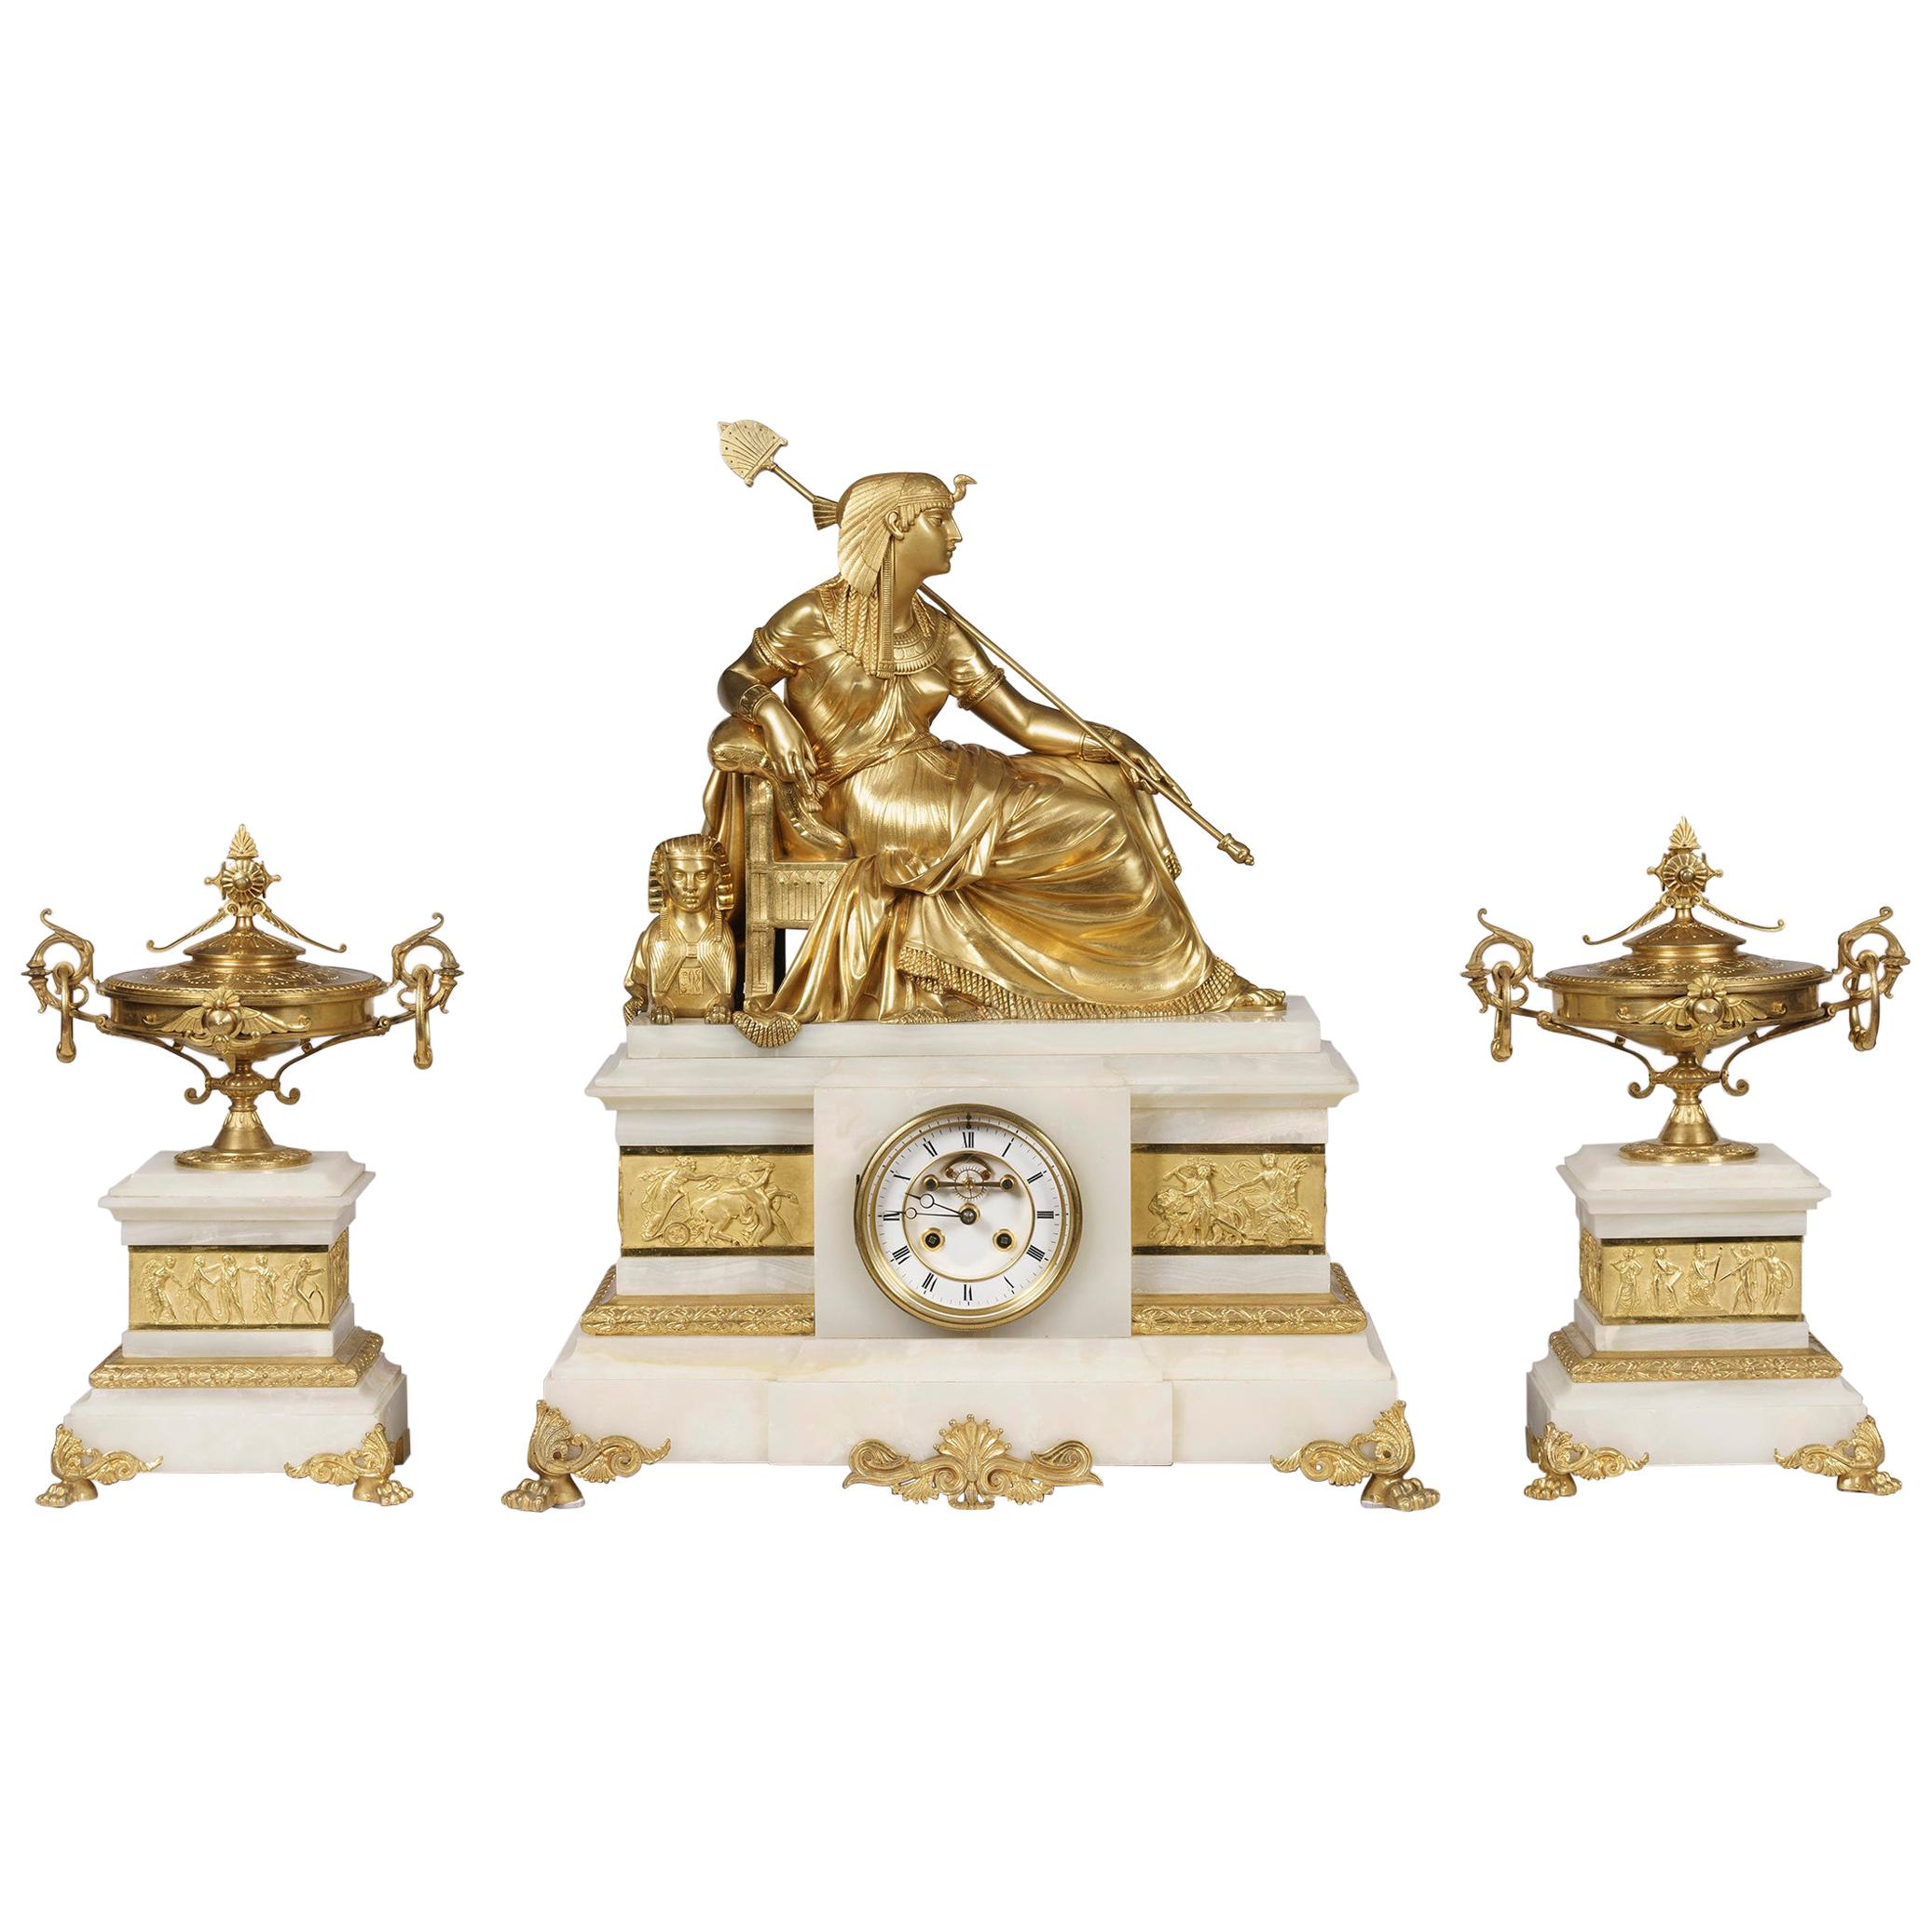 19th Century French Onyx and Ormolu Clock Garniture in the Egyptian Manner